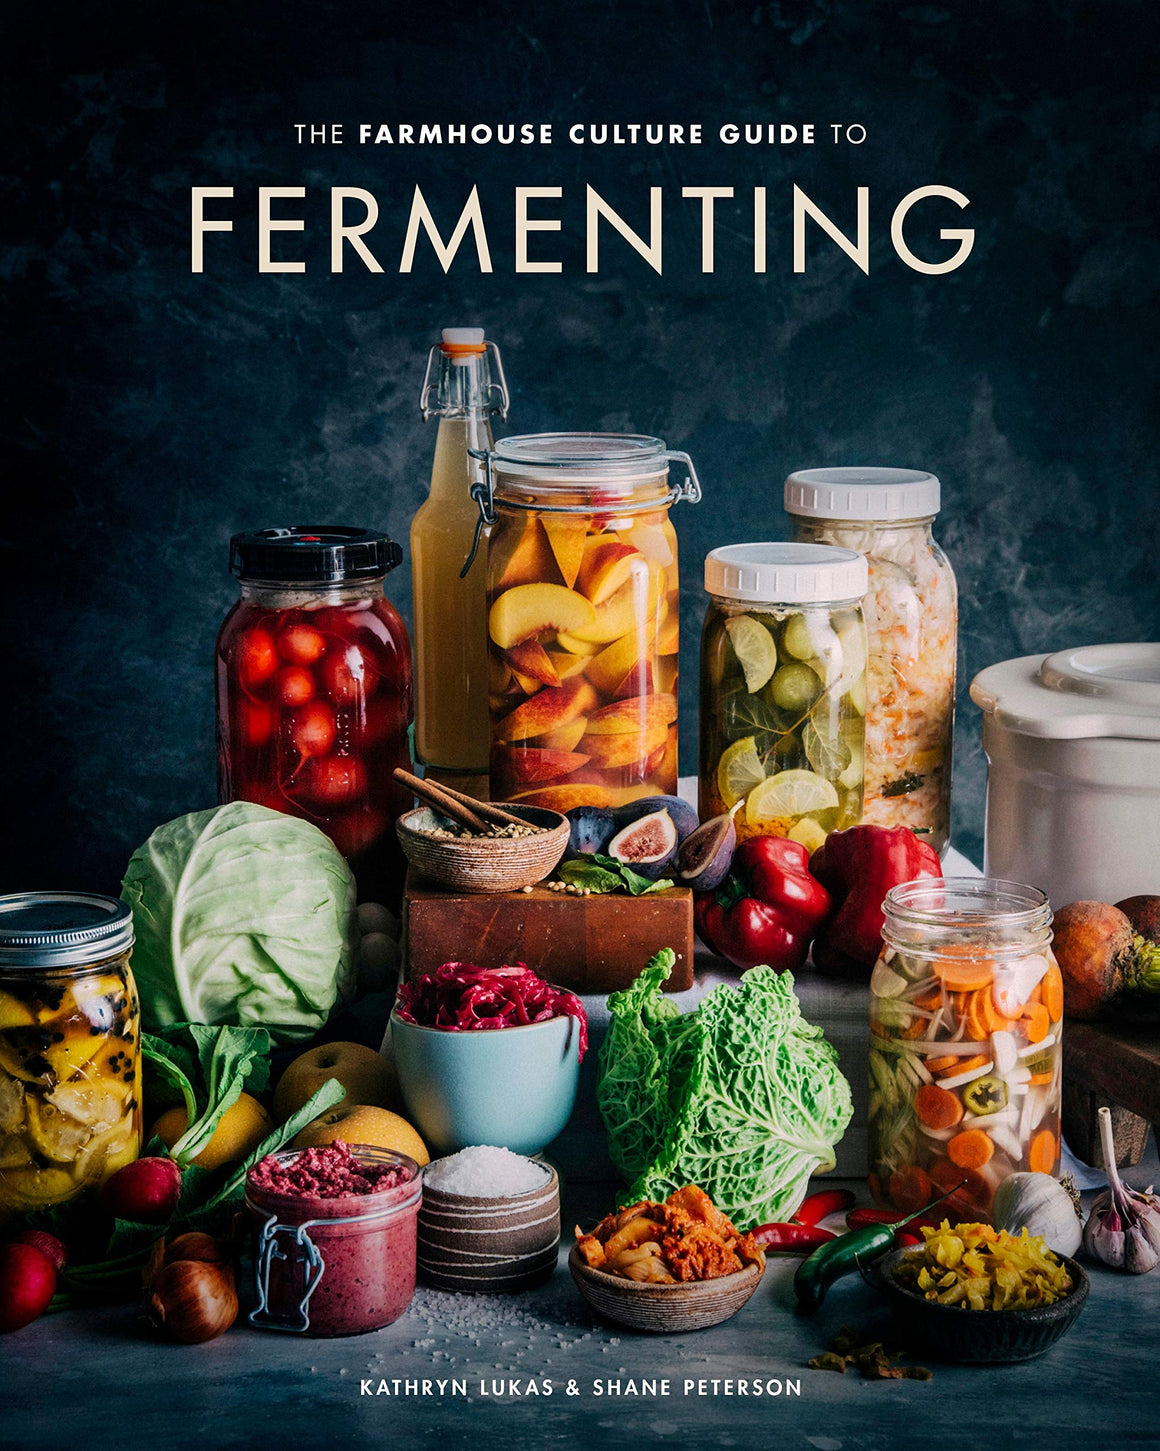 (Preserving - Fermentation) Kathryn Lukas & Shane Peterson. The Farmhouse Culture Guide to Fermenting: Crafting Live-Cultured Foods and Drinks with 100 Recipes from Kimchi to Kombucha